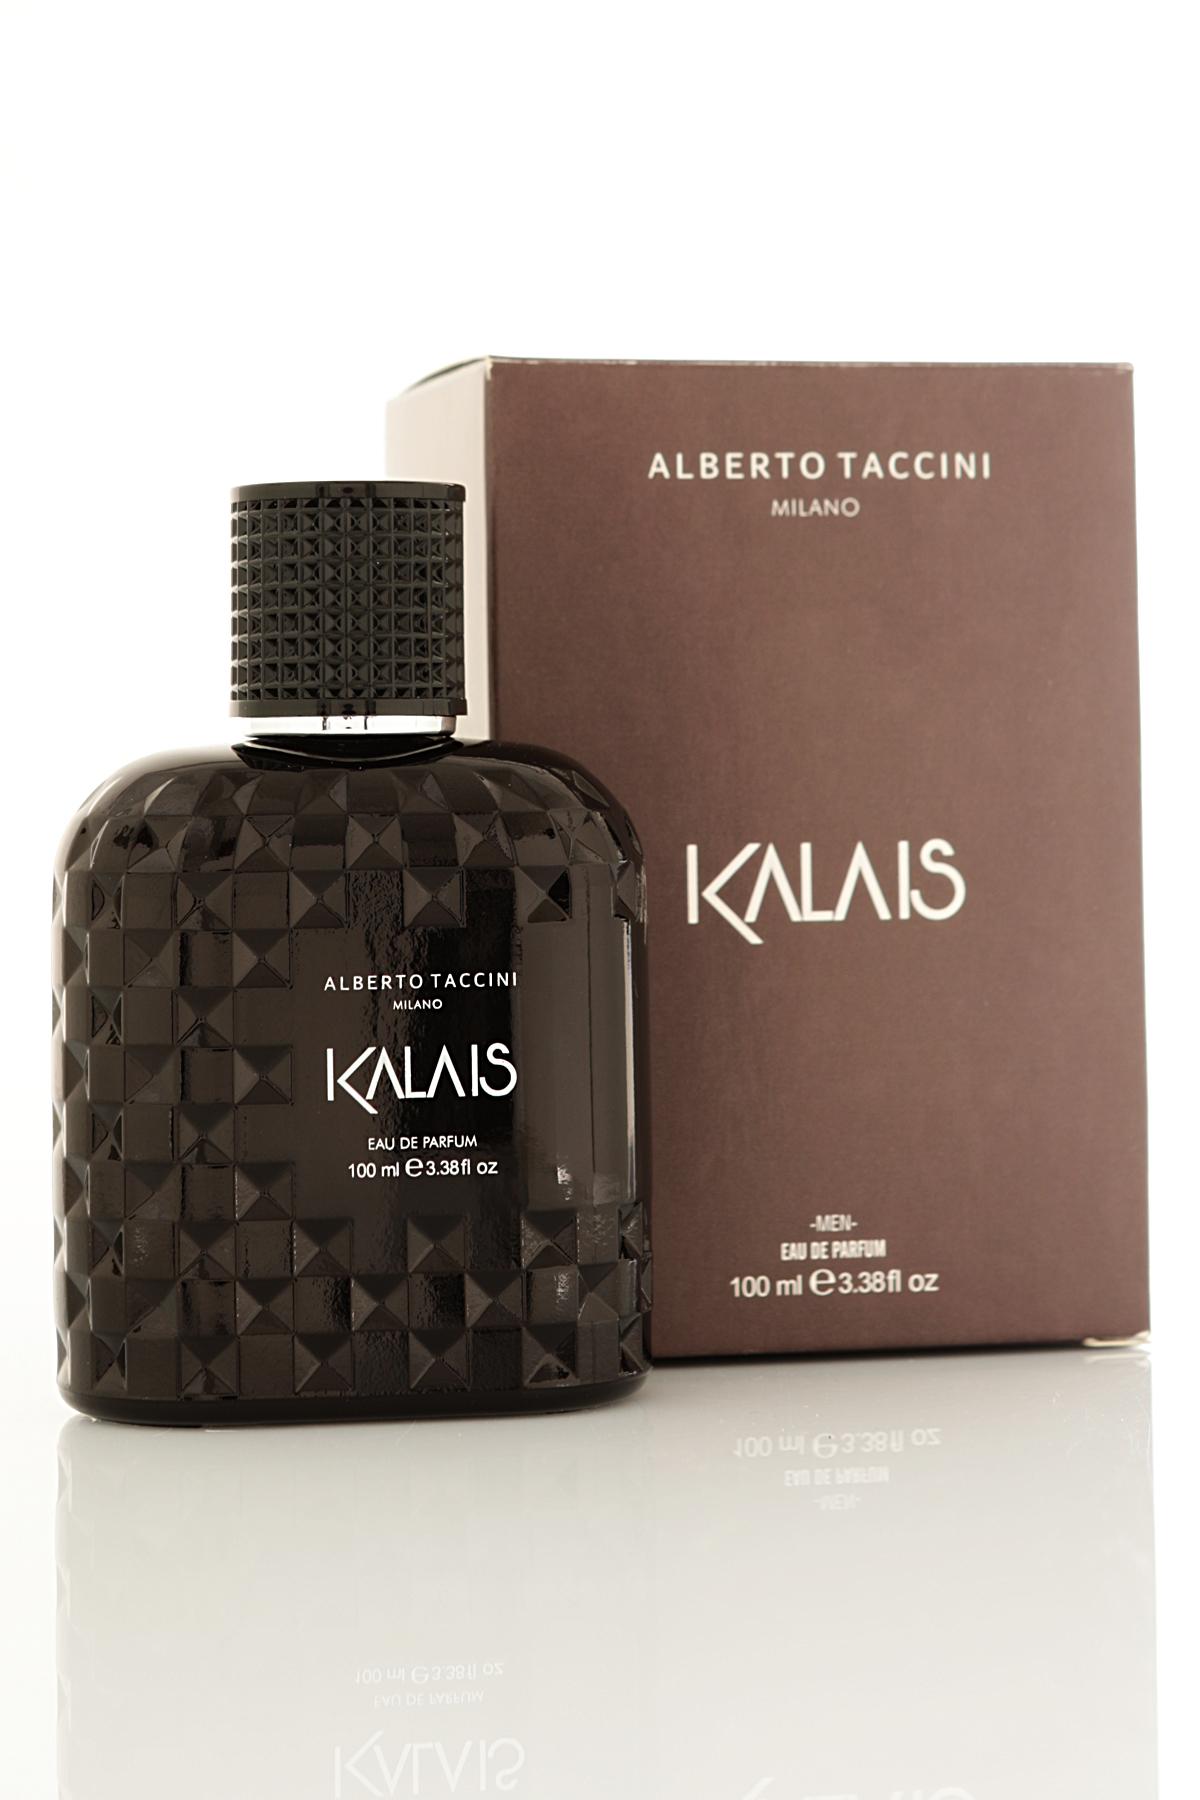 Selected image for PIERRE CARDIN Парфем за мажи Aлберто Tачини  Kalais 100мл.